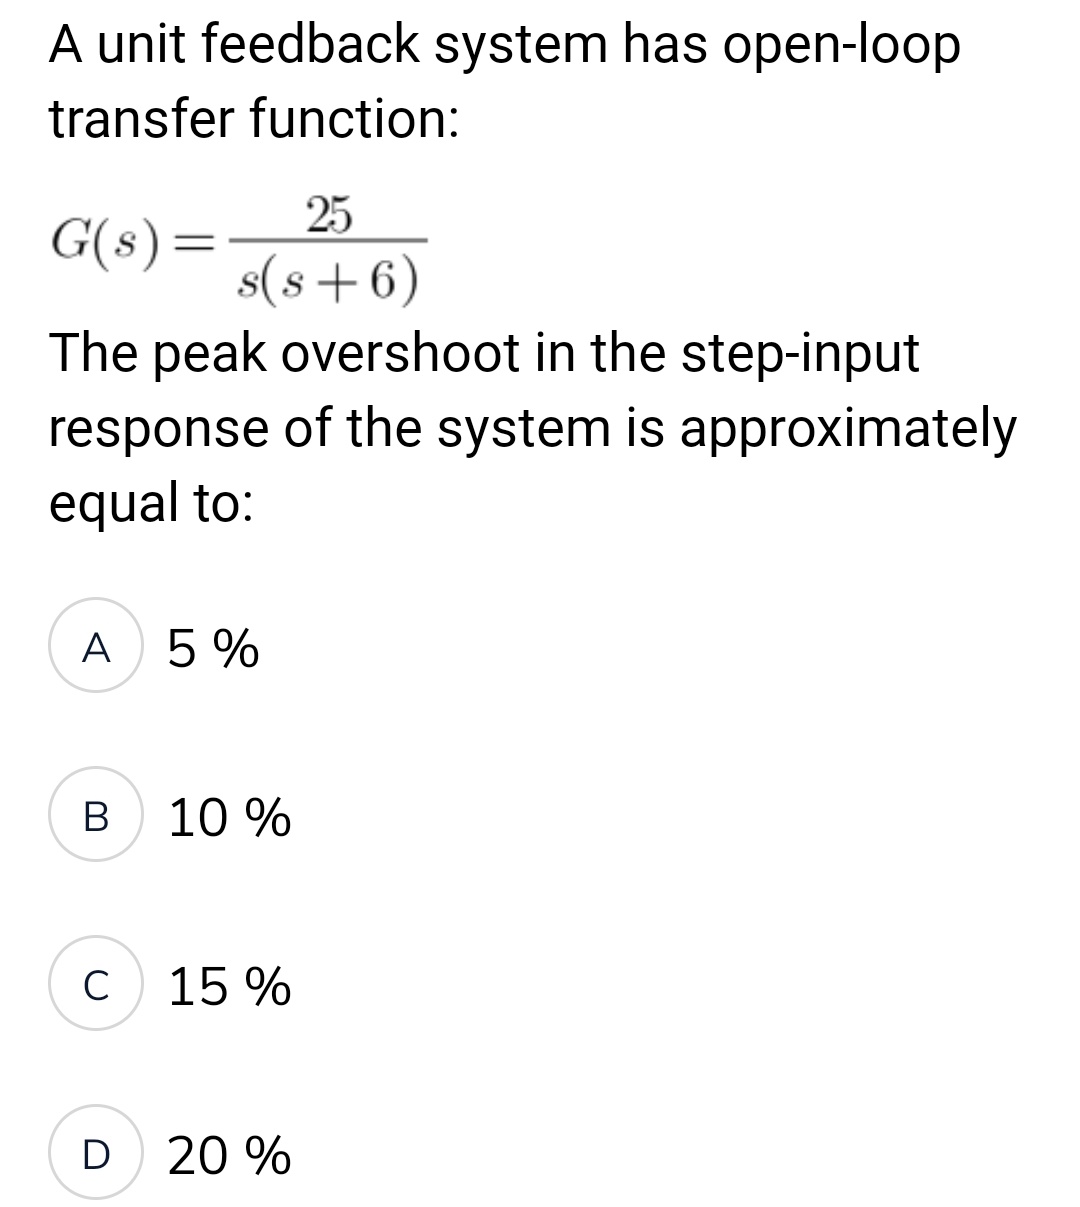 A unit feedback system has open-loop
transfer function:
25
G(s) =
s(s+6)
The peak overshoot in the step-input
response of the system is approximately
equal to:
A 5%
B 10 %
C
15%
D
20%